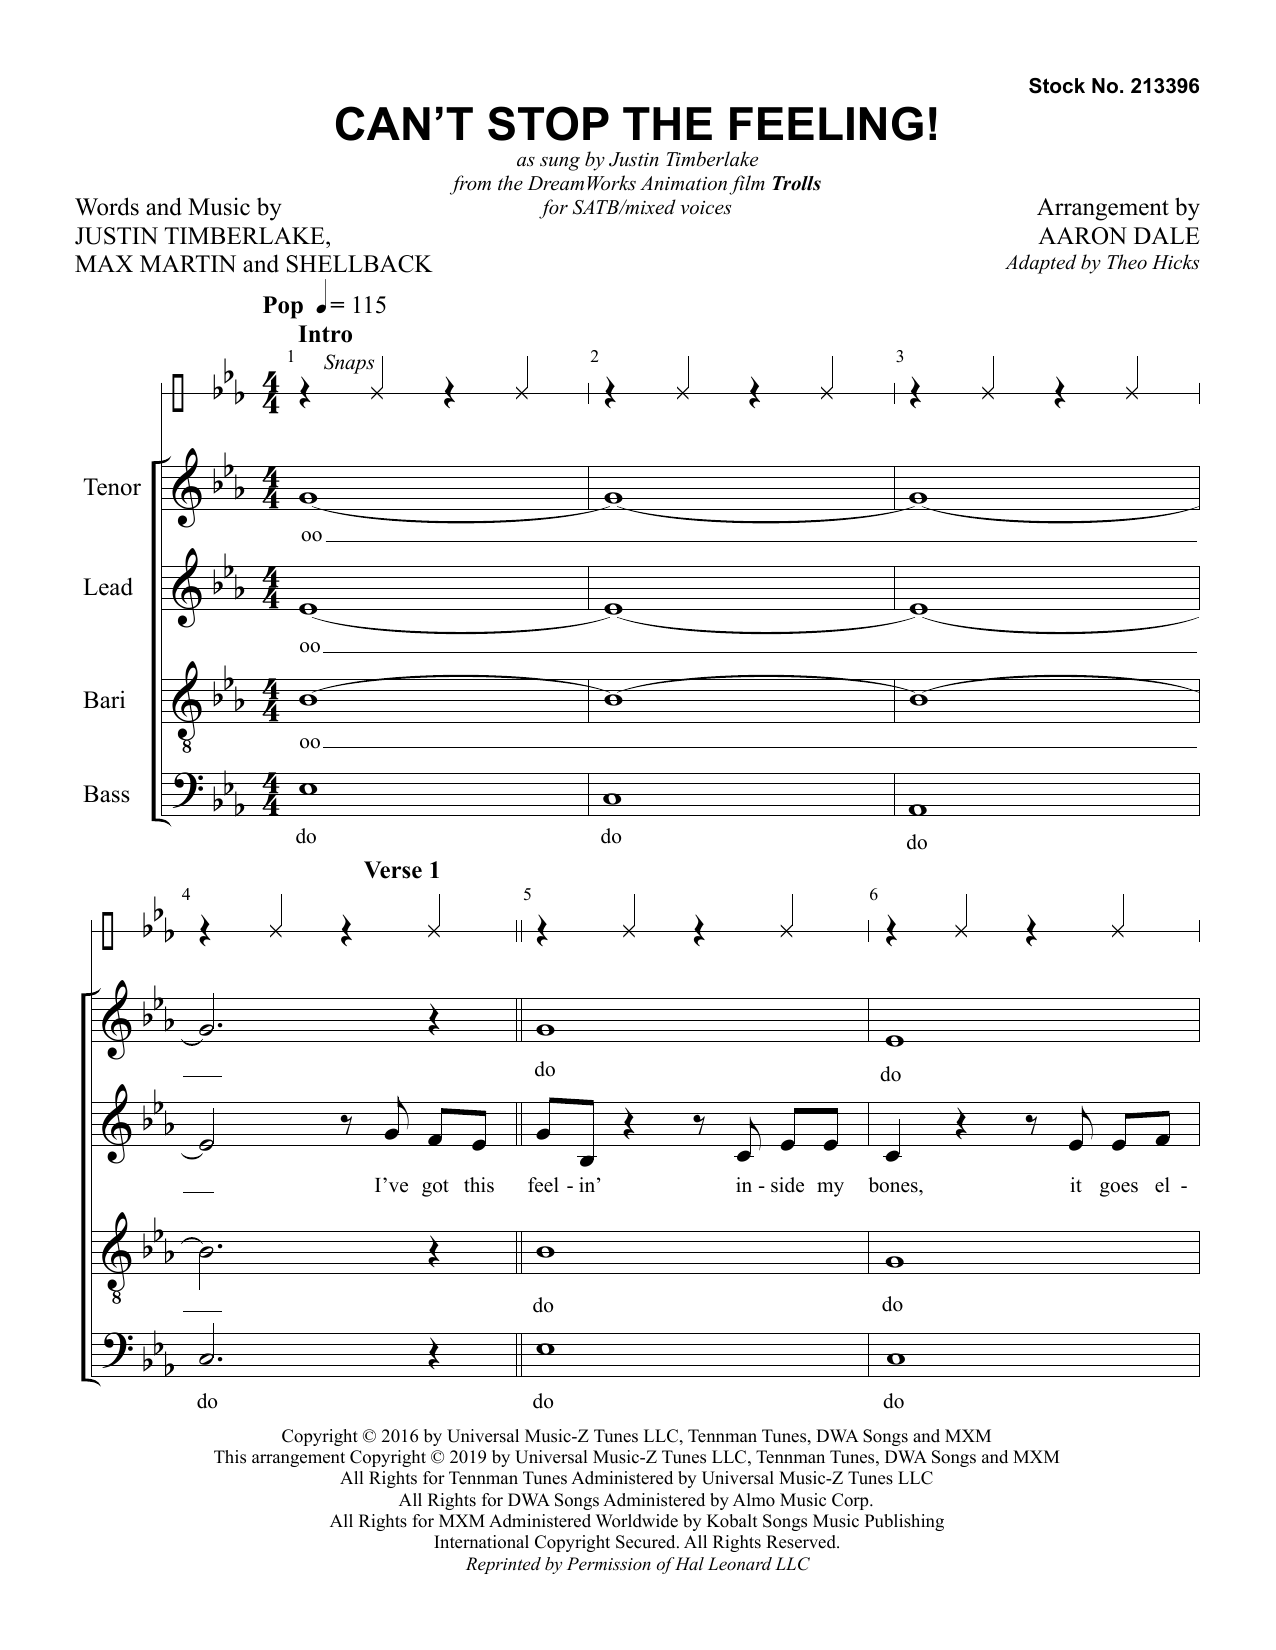 Download Justin Timberlake Can't Stop The Feeling! (from Trolls) ( Sheet Music